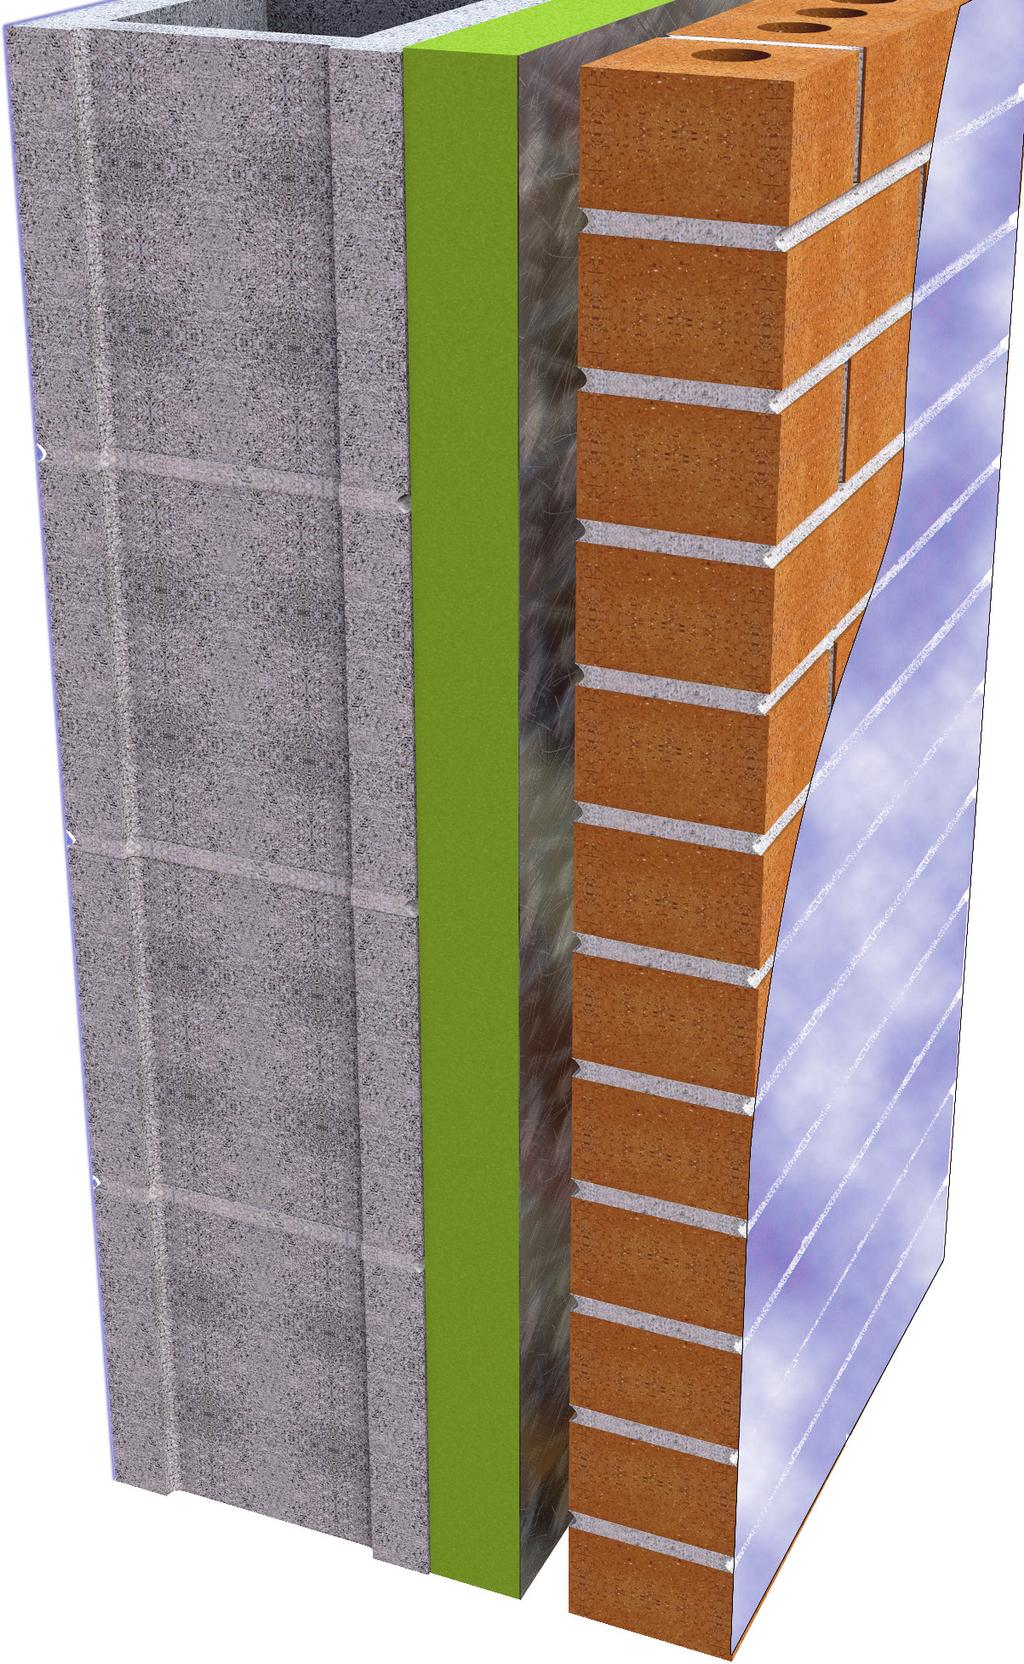 Article reprinted with permission from MasonryEdge/theStoryPole Vol 6 No 3 the Effectiveness of R-Value Effective Allow masonry s mass, which slowly warms and slowly releases heat for greater comfort